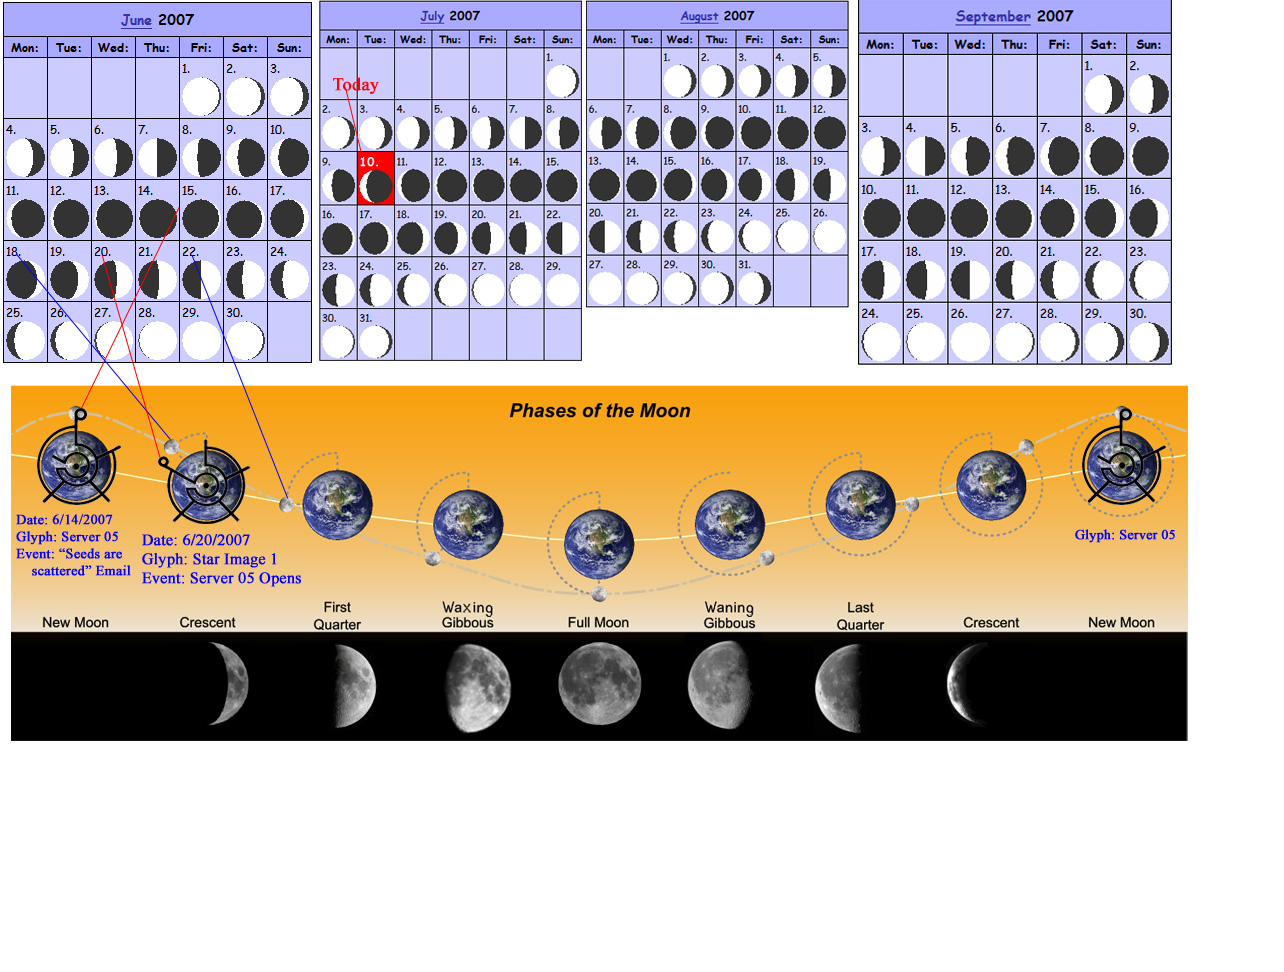 Phases of the moon, glyphs and events possibly correlated!